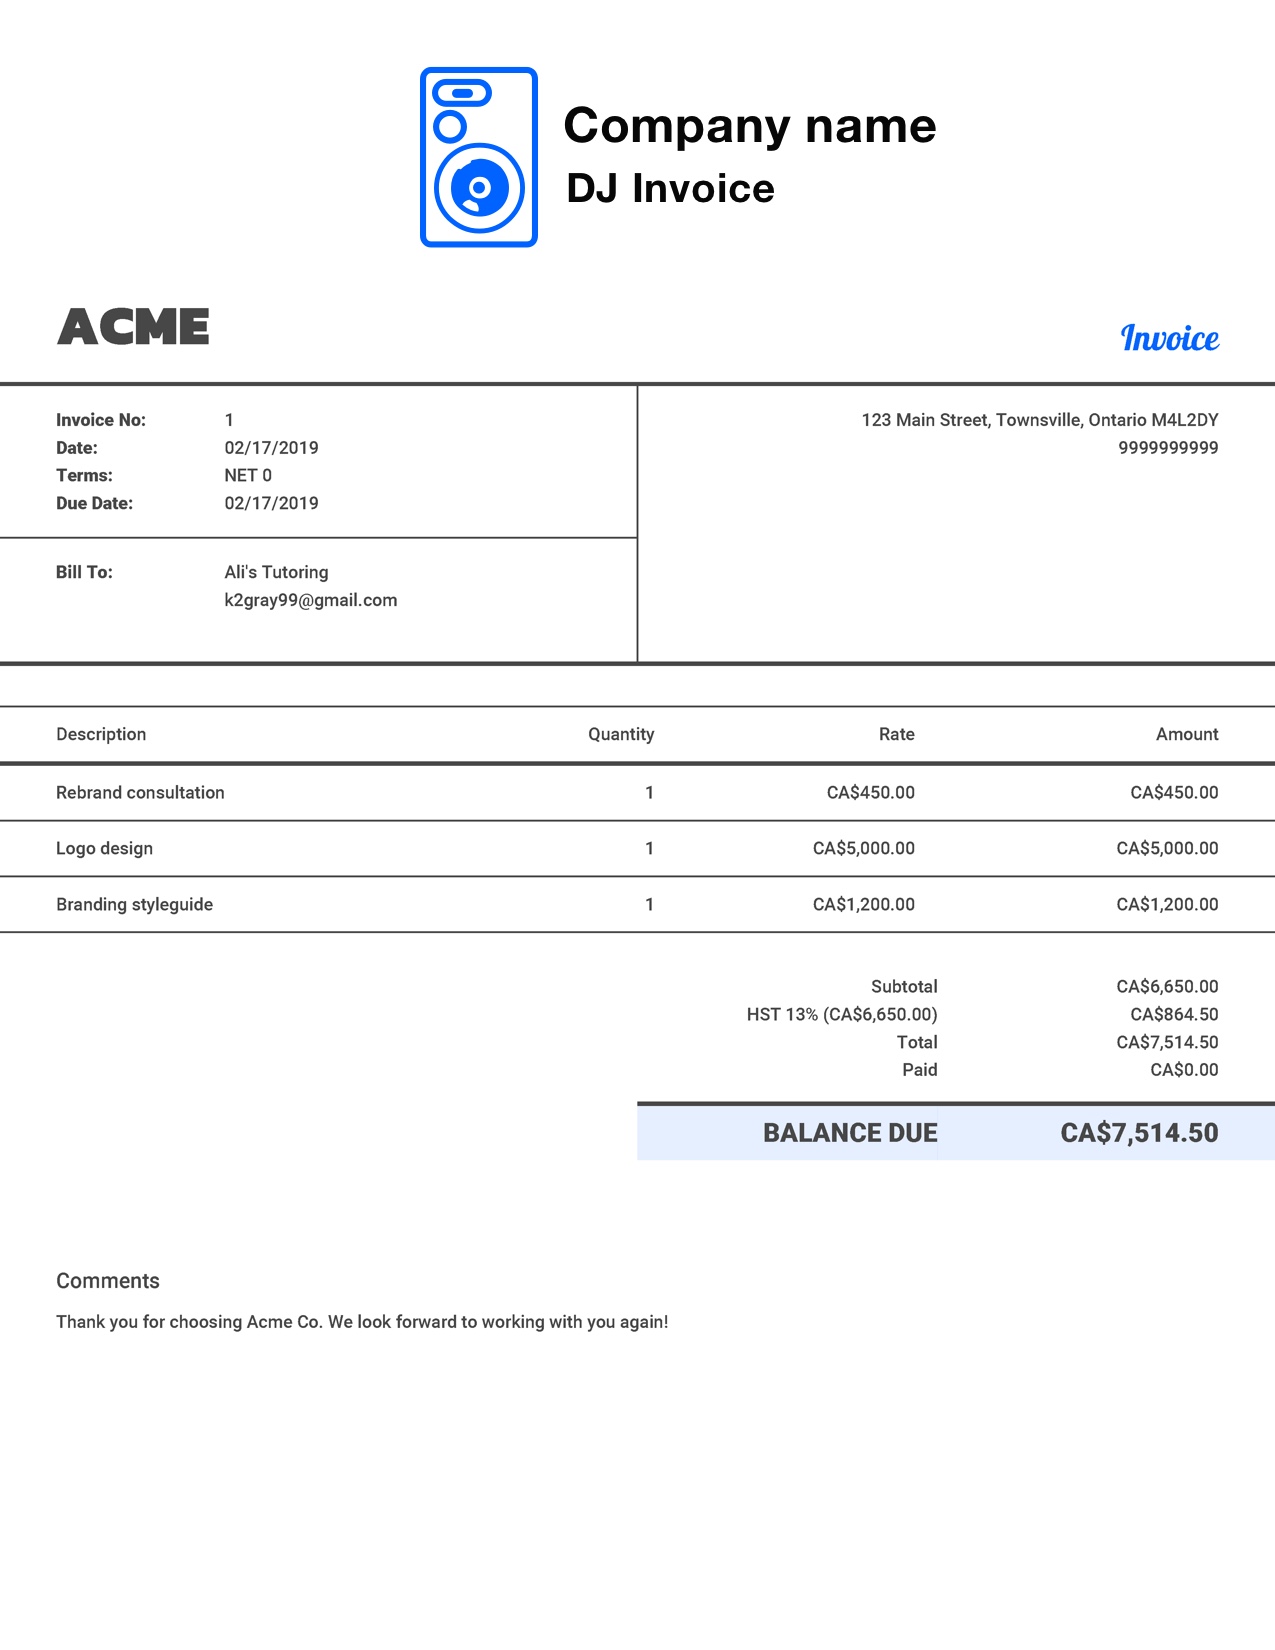 Free Dj Invoice Template. Customize and Send in 20 Seconds With Invoice Template For Dj Services